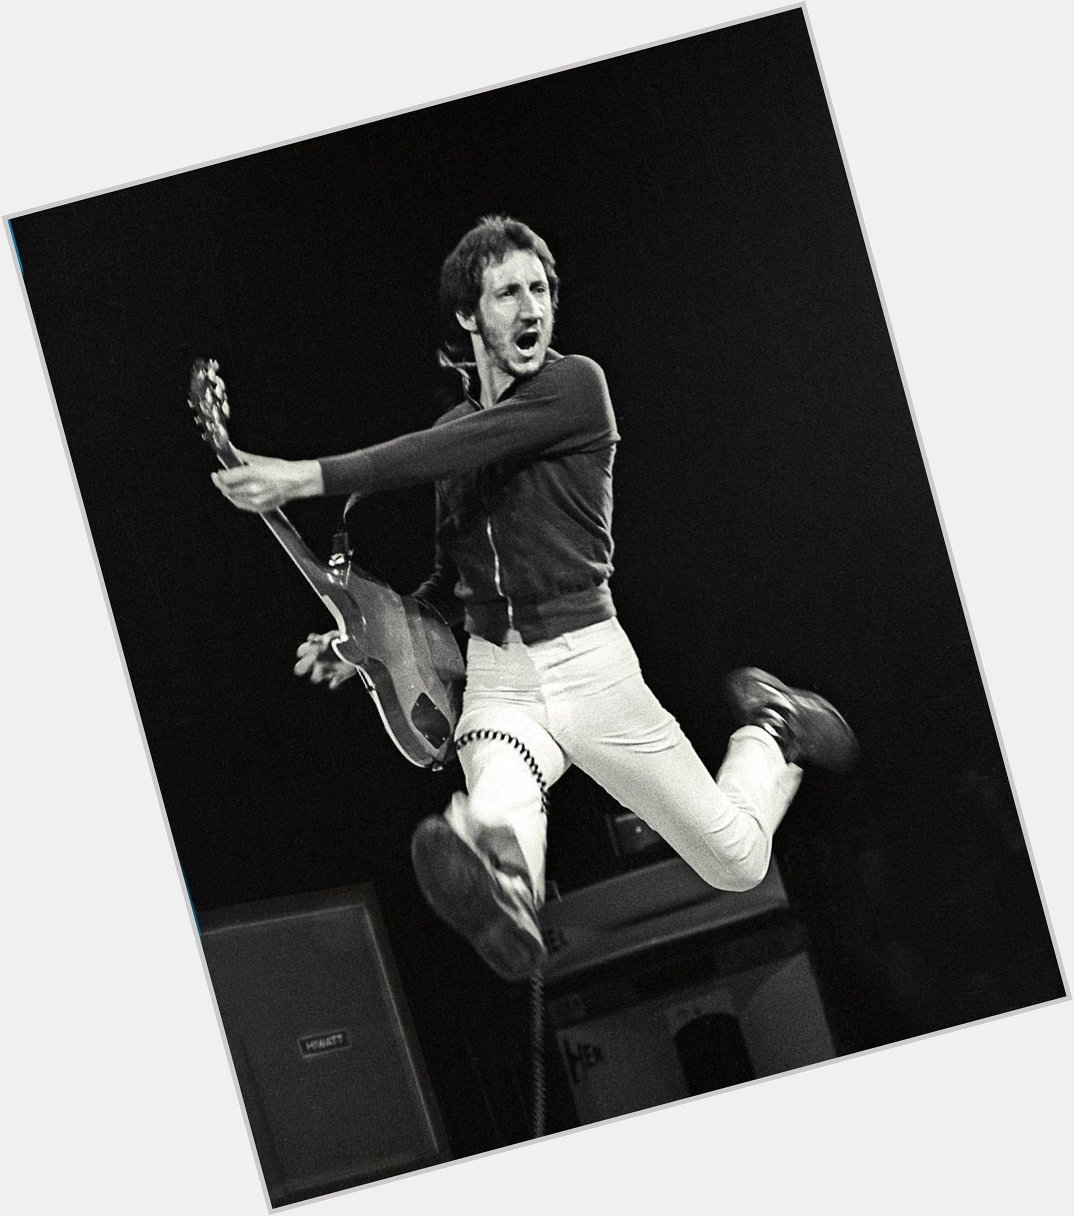 Happy 75th Birthday to Pete Townshend! 